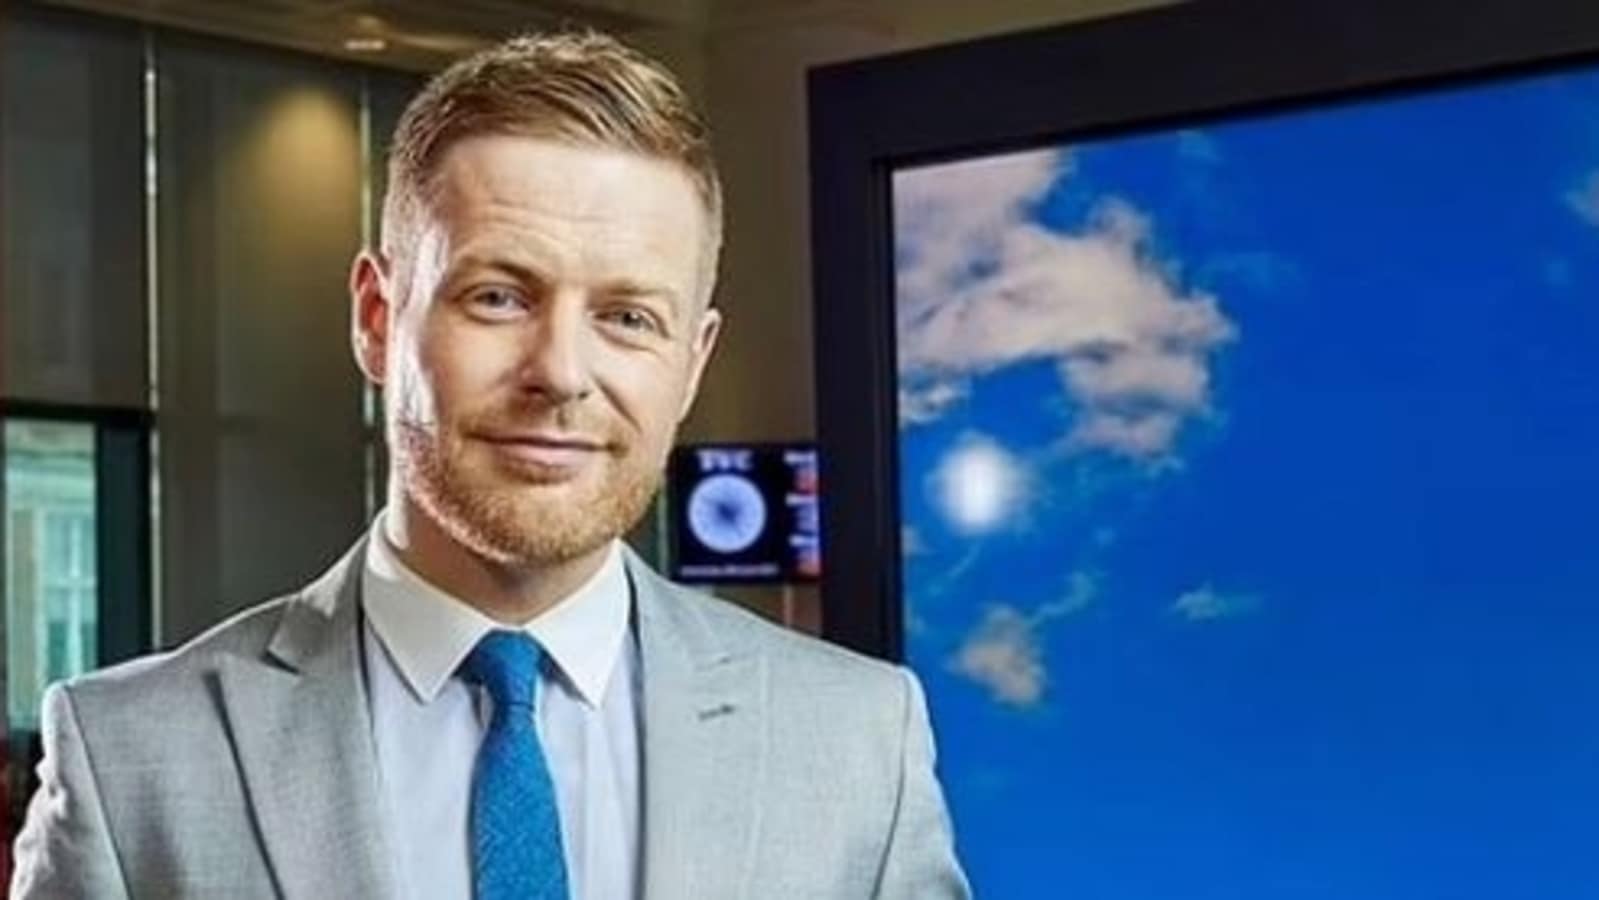 Bbc Weatherman Tomasz Schafernakers Reaction To Queen Acquiring A ‘crush On Him World News